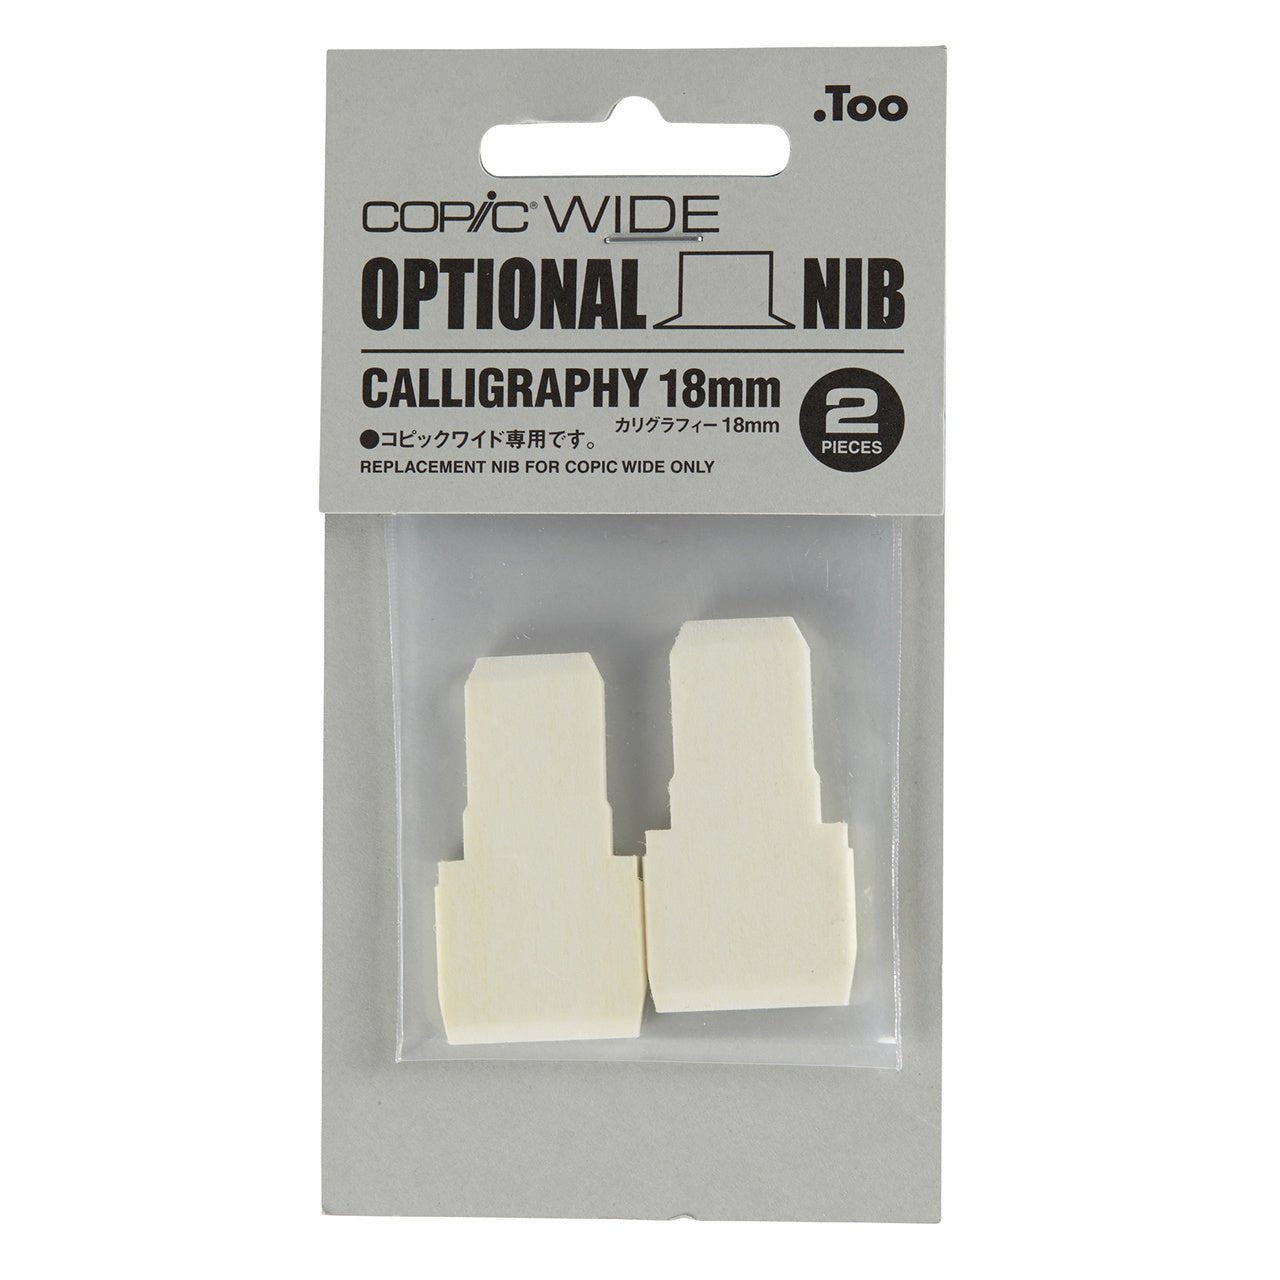 Copic Broad Calligraphy Nib 18mm (for WIDE) - merriartist.com